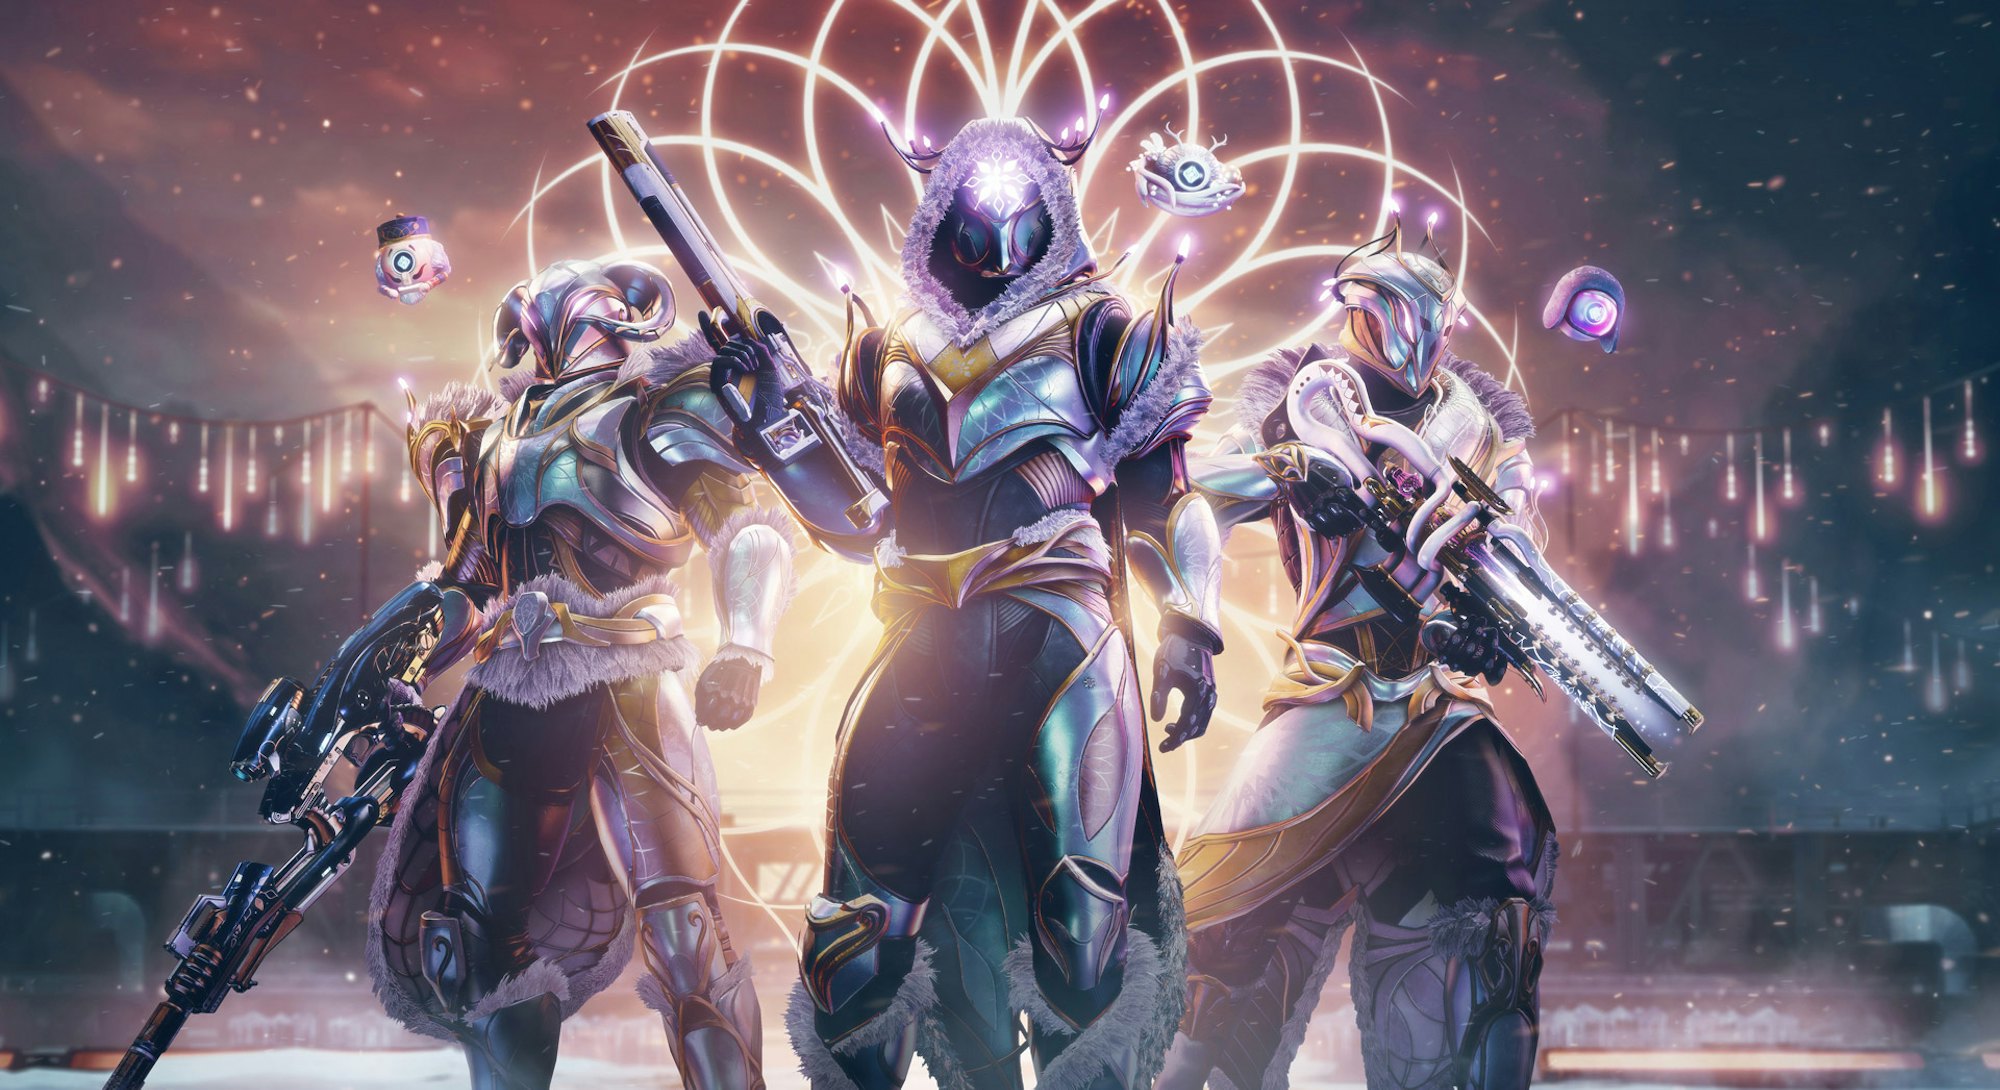 artwork from Destiny 2 The Dawning 2022